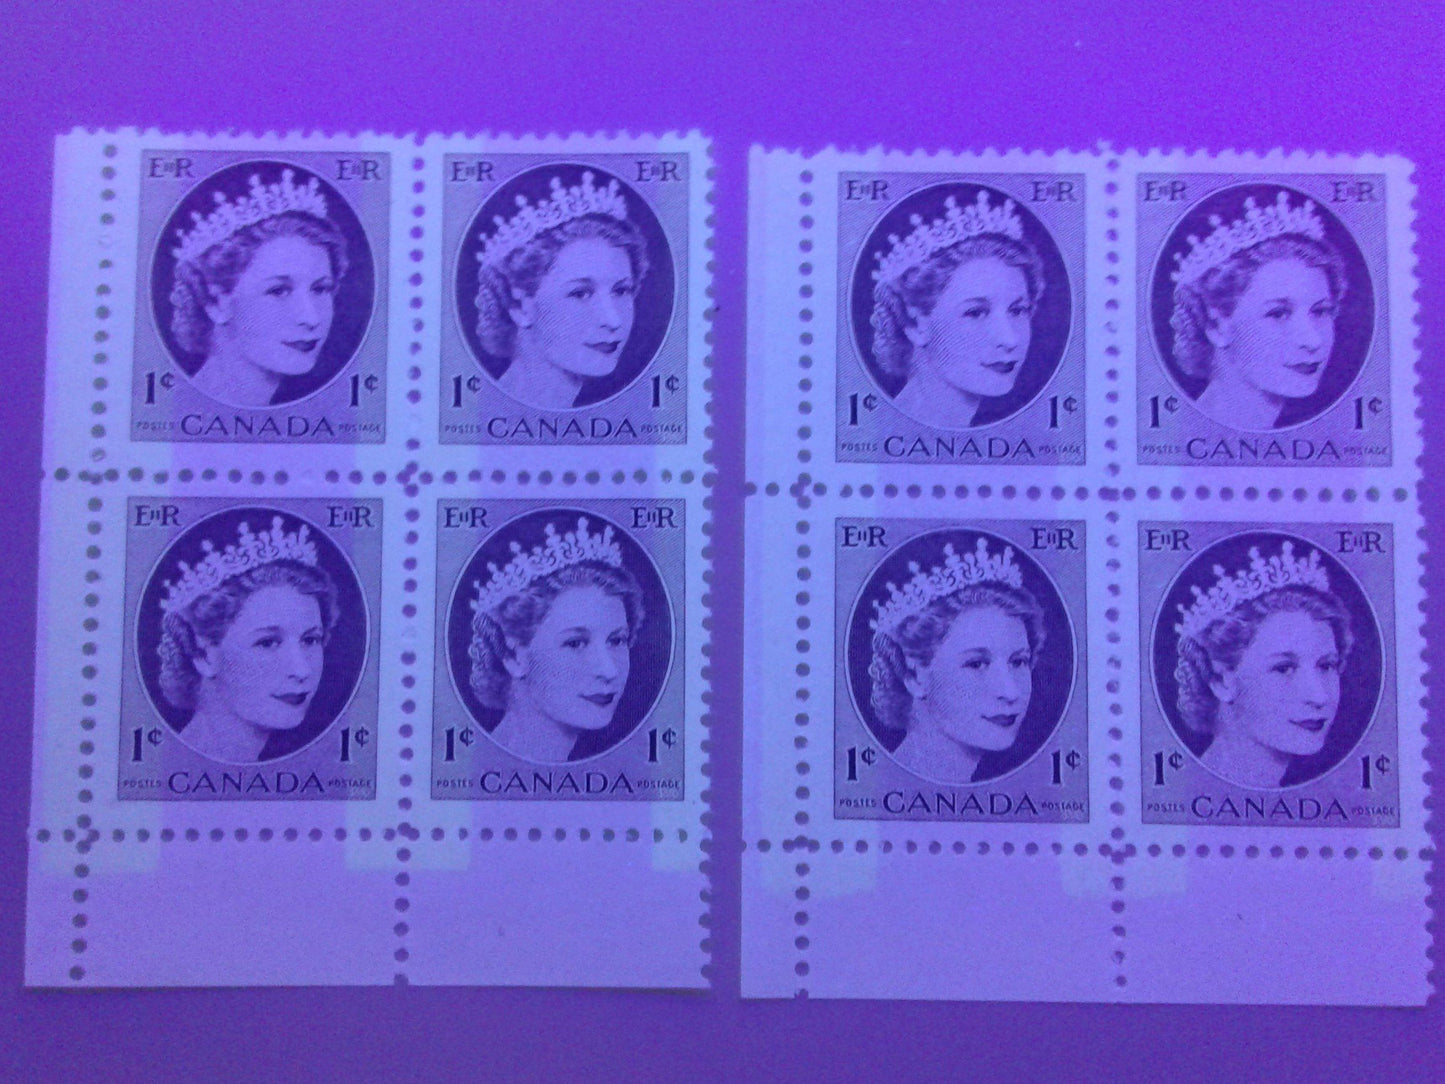 Canada #337p(var) 1c Chocolate Queen Elizabeth II, 1954-1962 Wilding Issue, Lower Right Blank Winnipeg Tagged Blocks of 4, Three Different, Various Perfs., DF Gr Vertically Ribbed Paper, Streaky Semi Gloss Gum, Bluish White Tagging, Uneven Bars, VFNH Brixton Chrome 